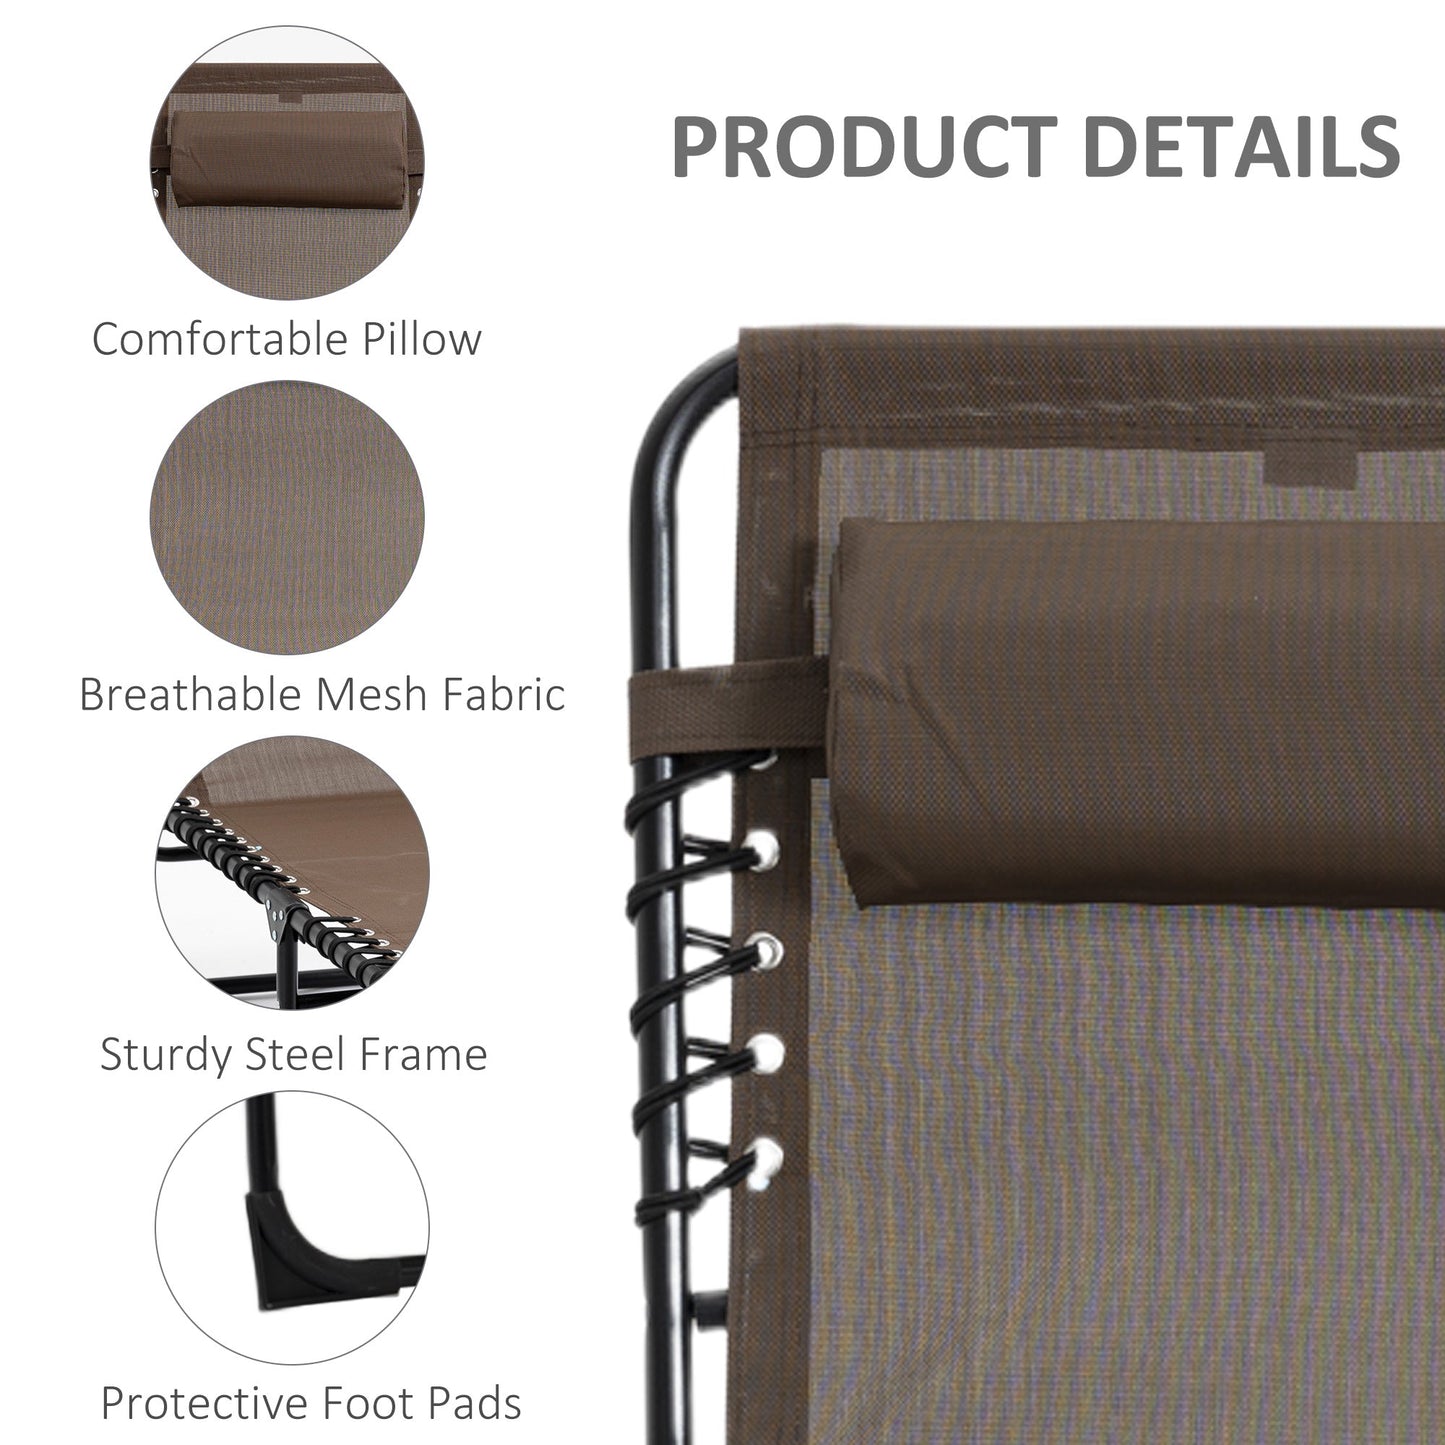 Miscellaneous-Reclining Lounge Chair, Portable Sun Lounger, Folding Camping Cot, with Adjustable Backrest and Removable Pillow, for Patio, Garden, Beach - Brown - Outdoor Style Company